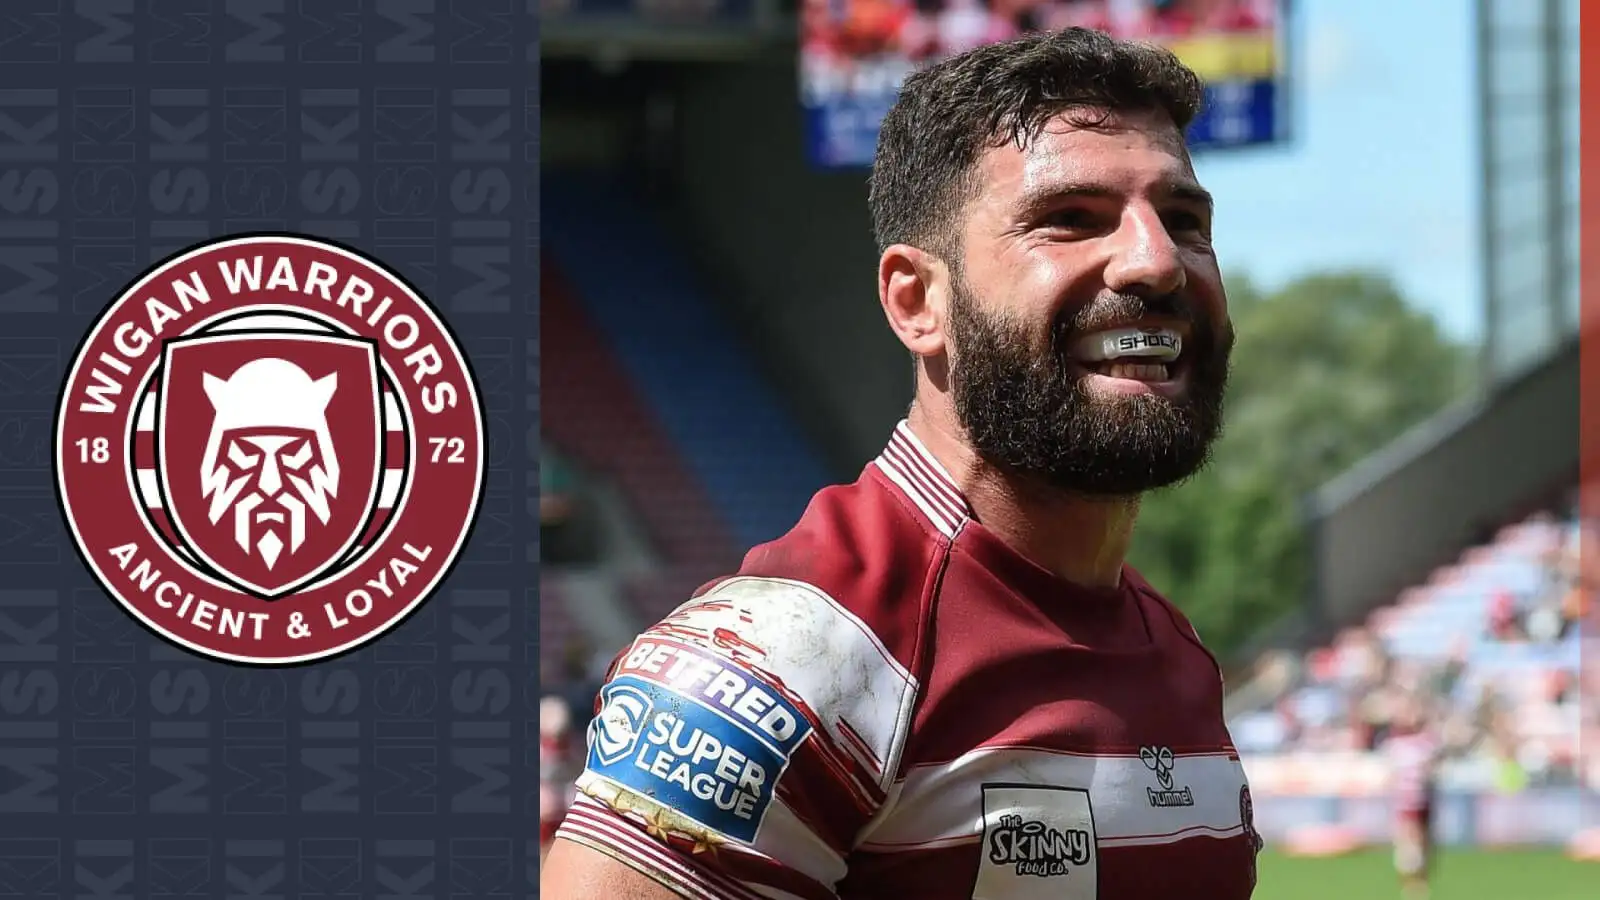 Wigan Warriors: The impressive stats behind Abbas Miski rise, Lebanon ace reaping rewards of ‘hard work and self belief’